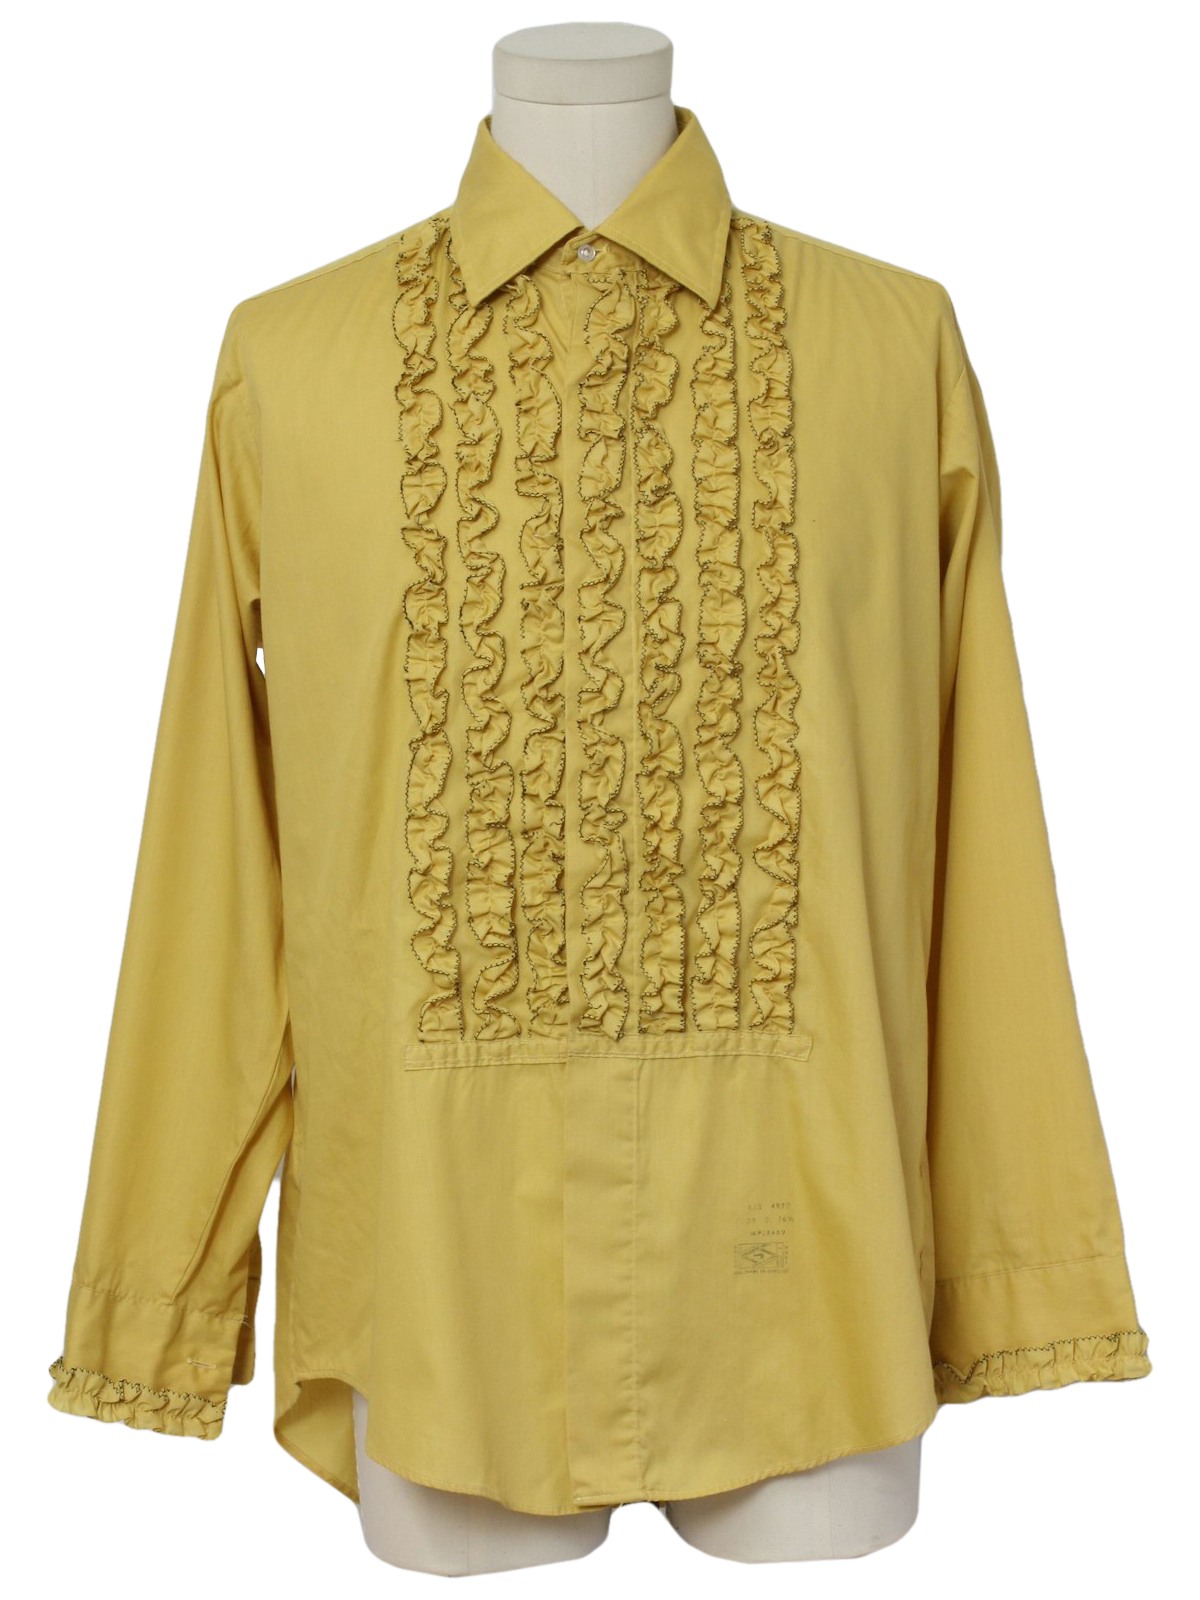 Retro 70's Shirt: 70s -Lion of Troy- Mens harvest gold and black cotton and polyester blend